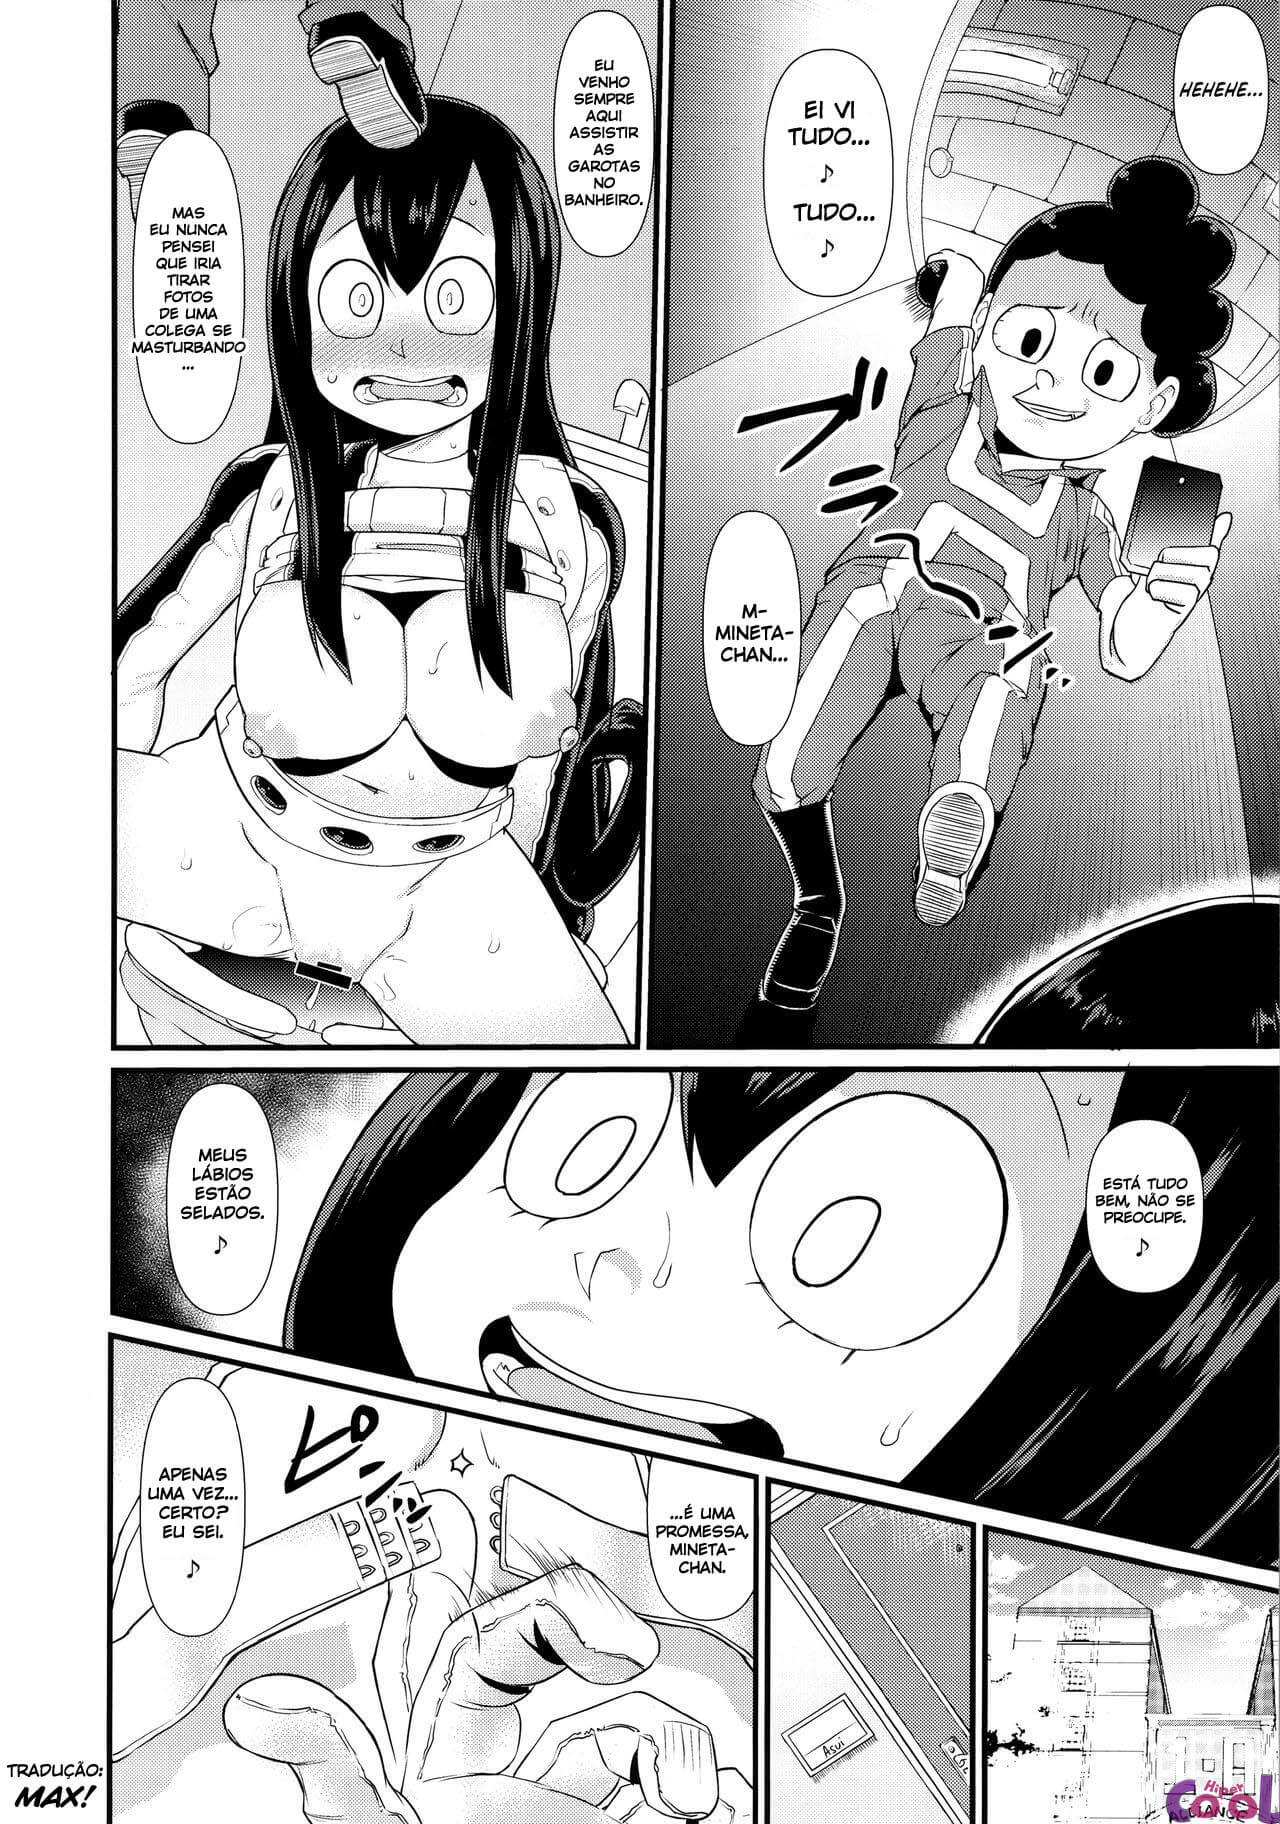 froppy-chapter-01-page-09.jpg